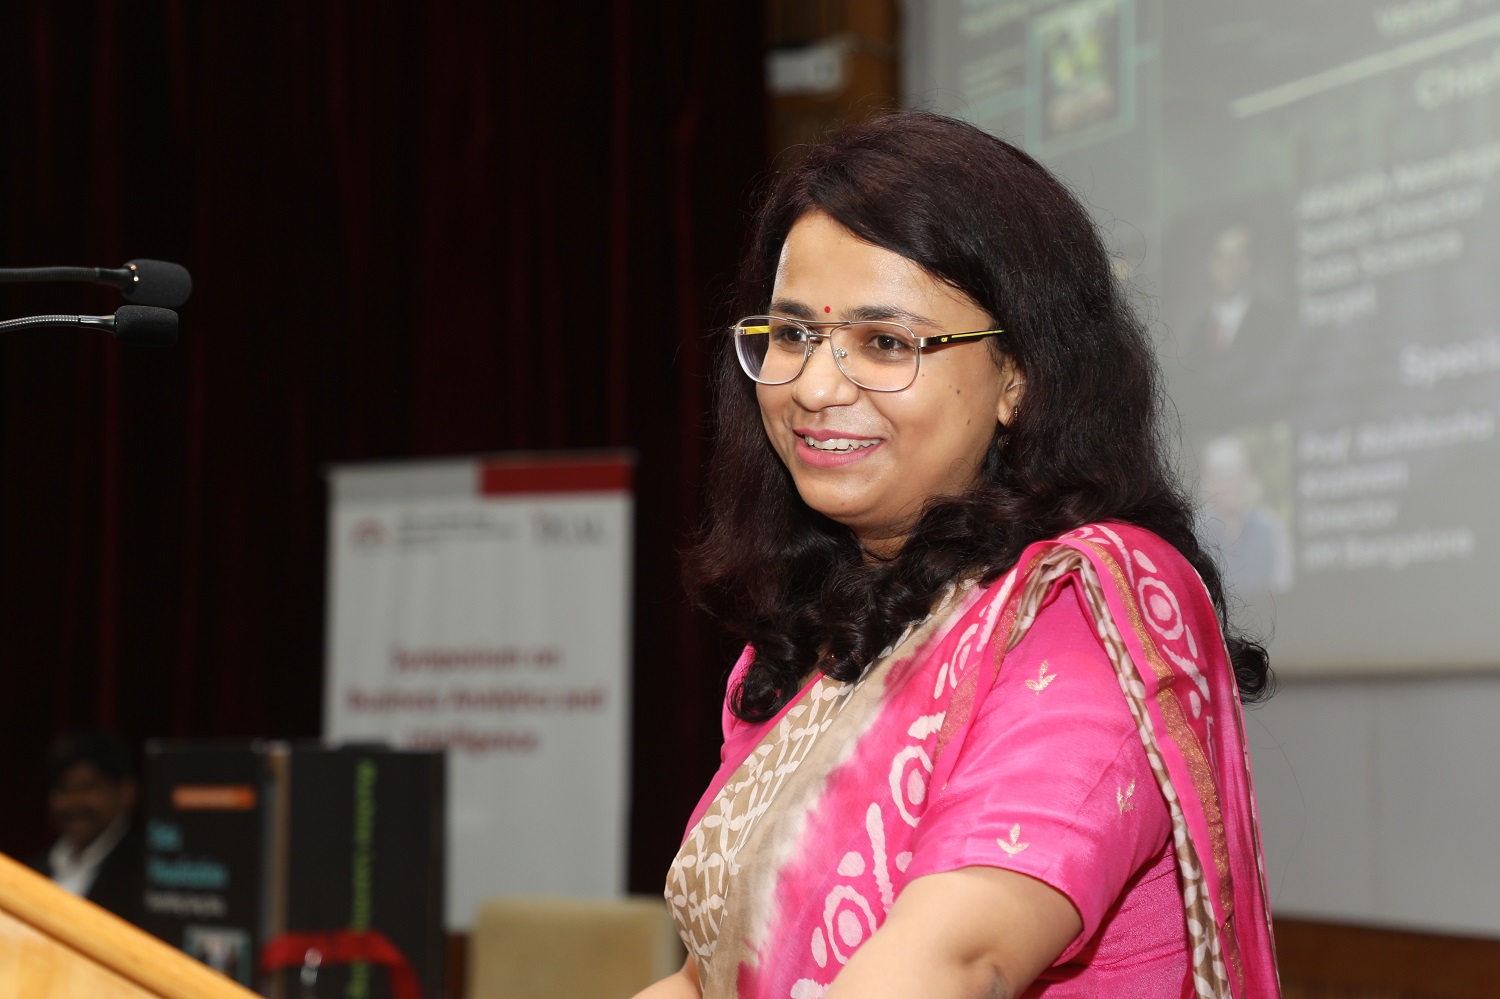 Purvi Tiwari, Co-Author, ‘Data Visualization’, speaks about the book.